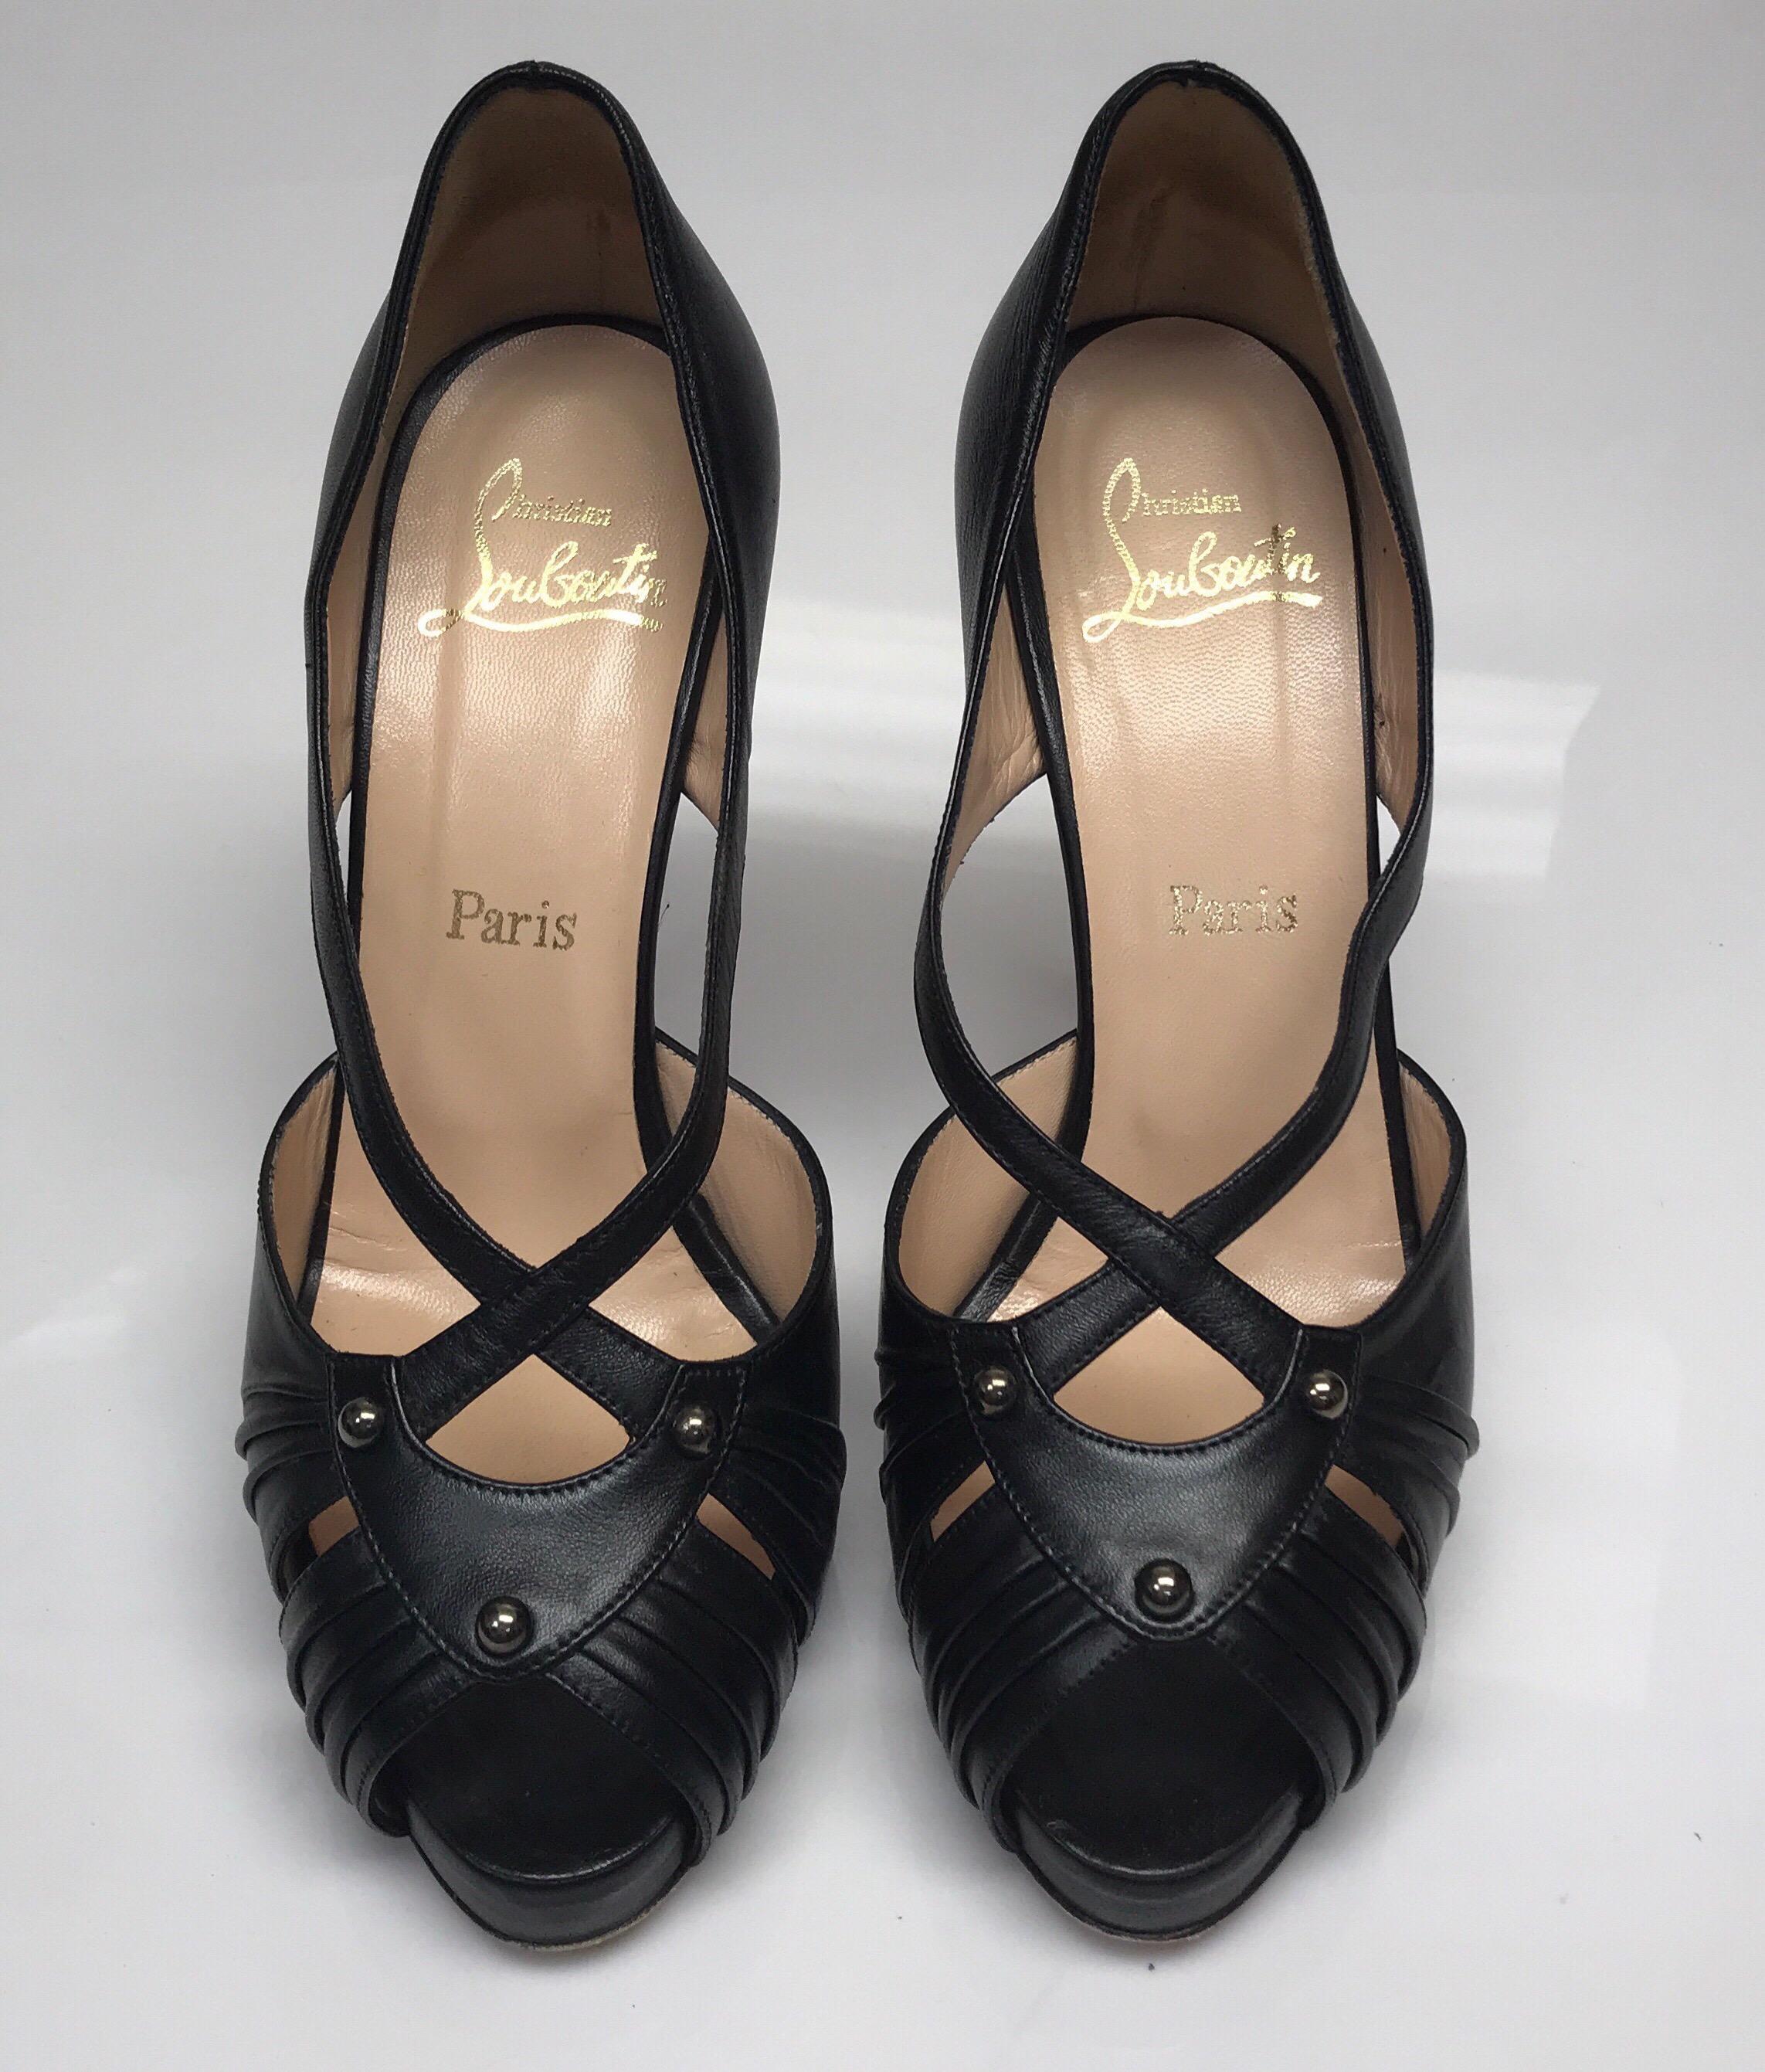 Christian Louboutin Black Strappy Platform Shoes-38.5. These beautiful Christian Louboutin heels are in great condition. They show minor signs of use only to the bottom of the shoe with part of the red rubbed away. They are made of black leather and